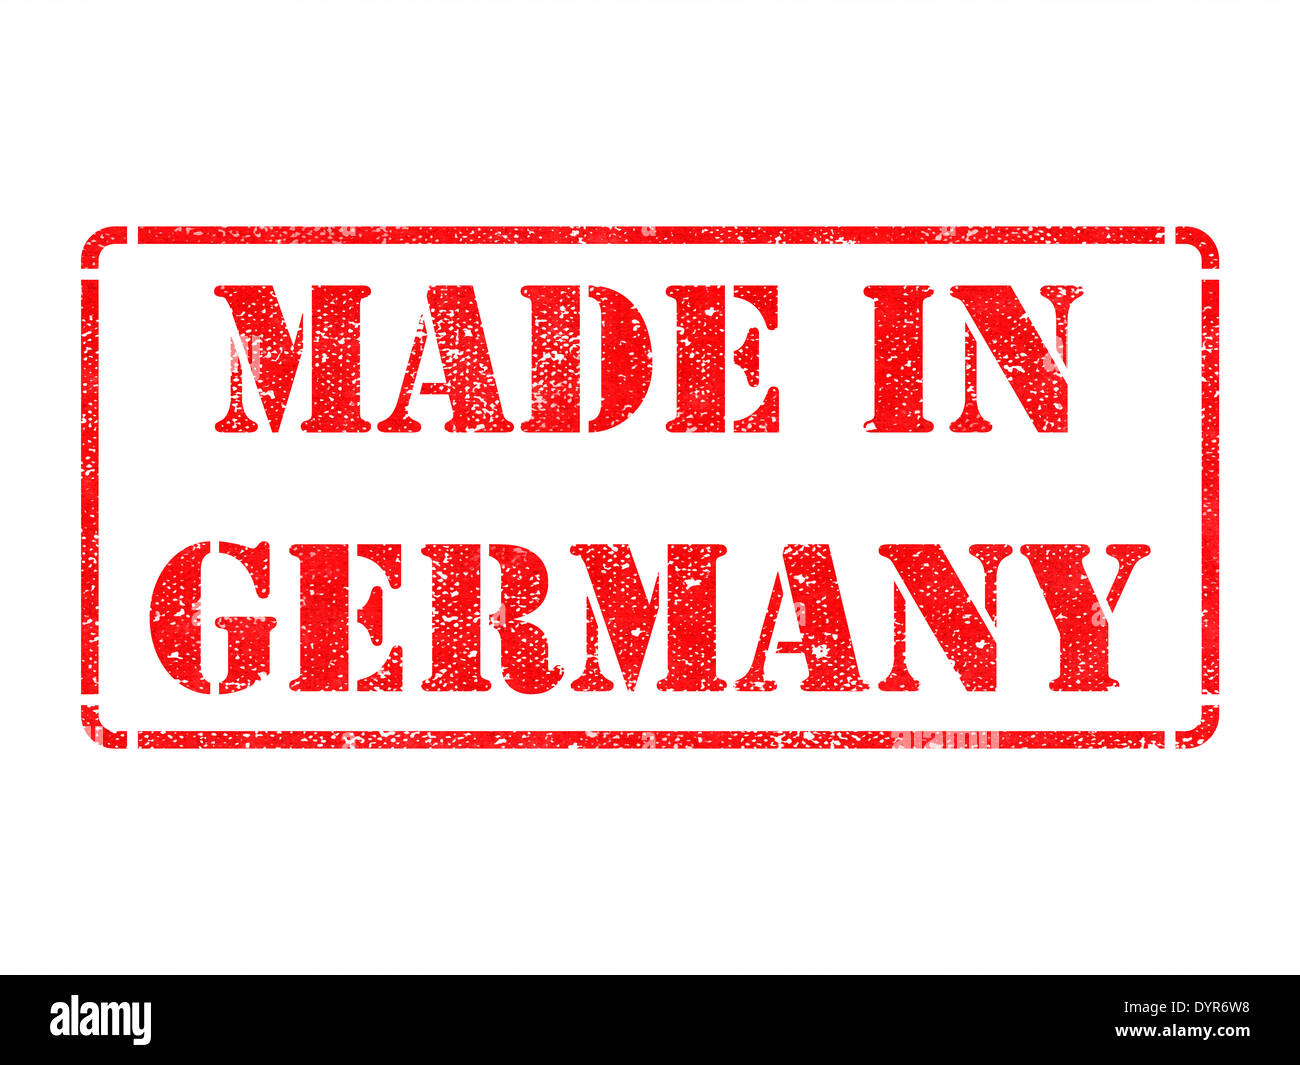 Made in Germany - inscription on Red Rubber Stamp Isolated on White. Stock Photo